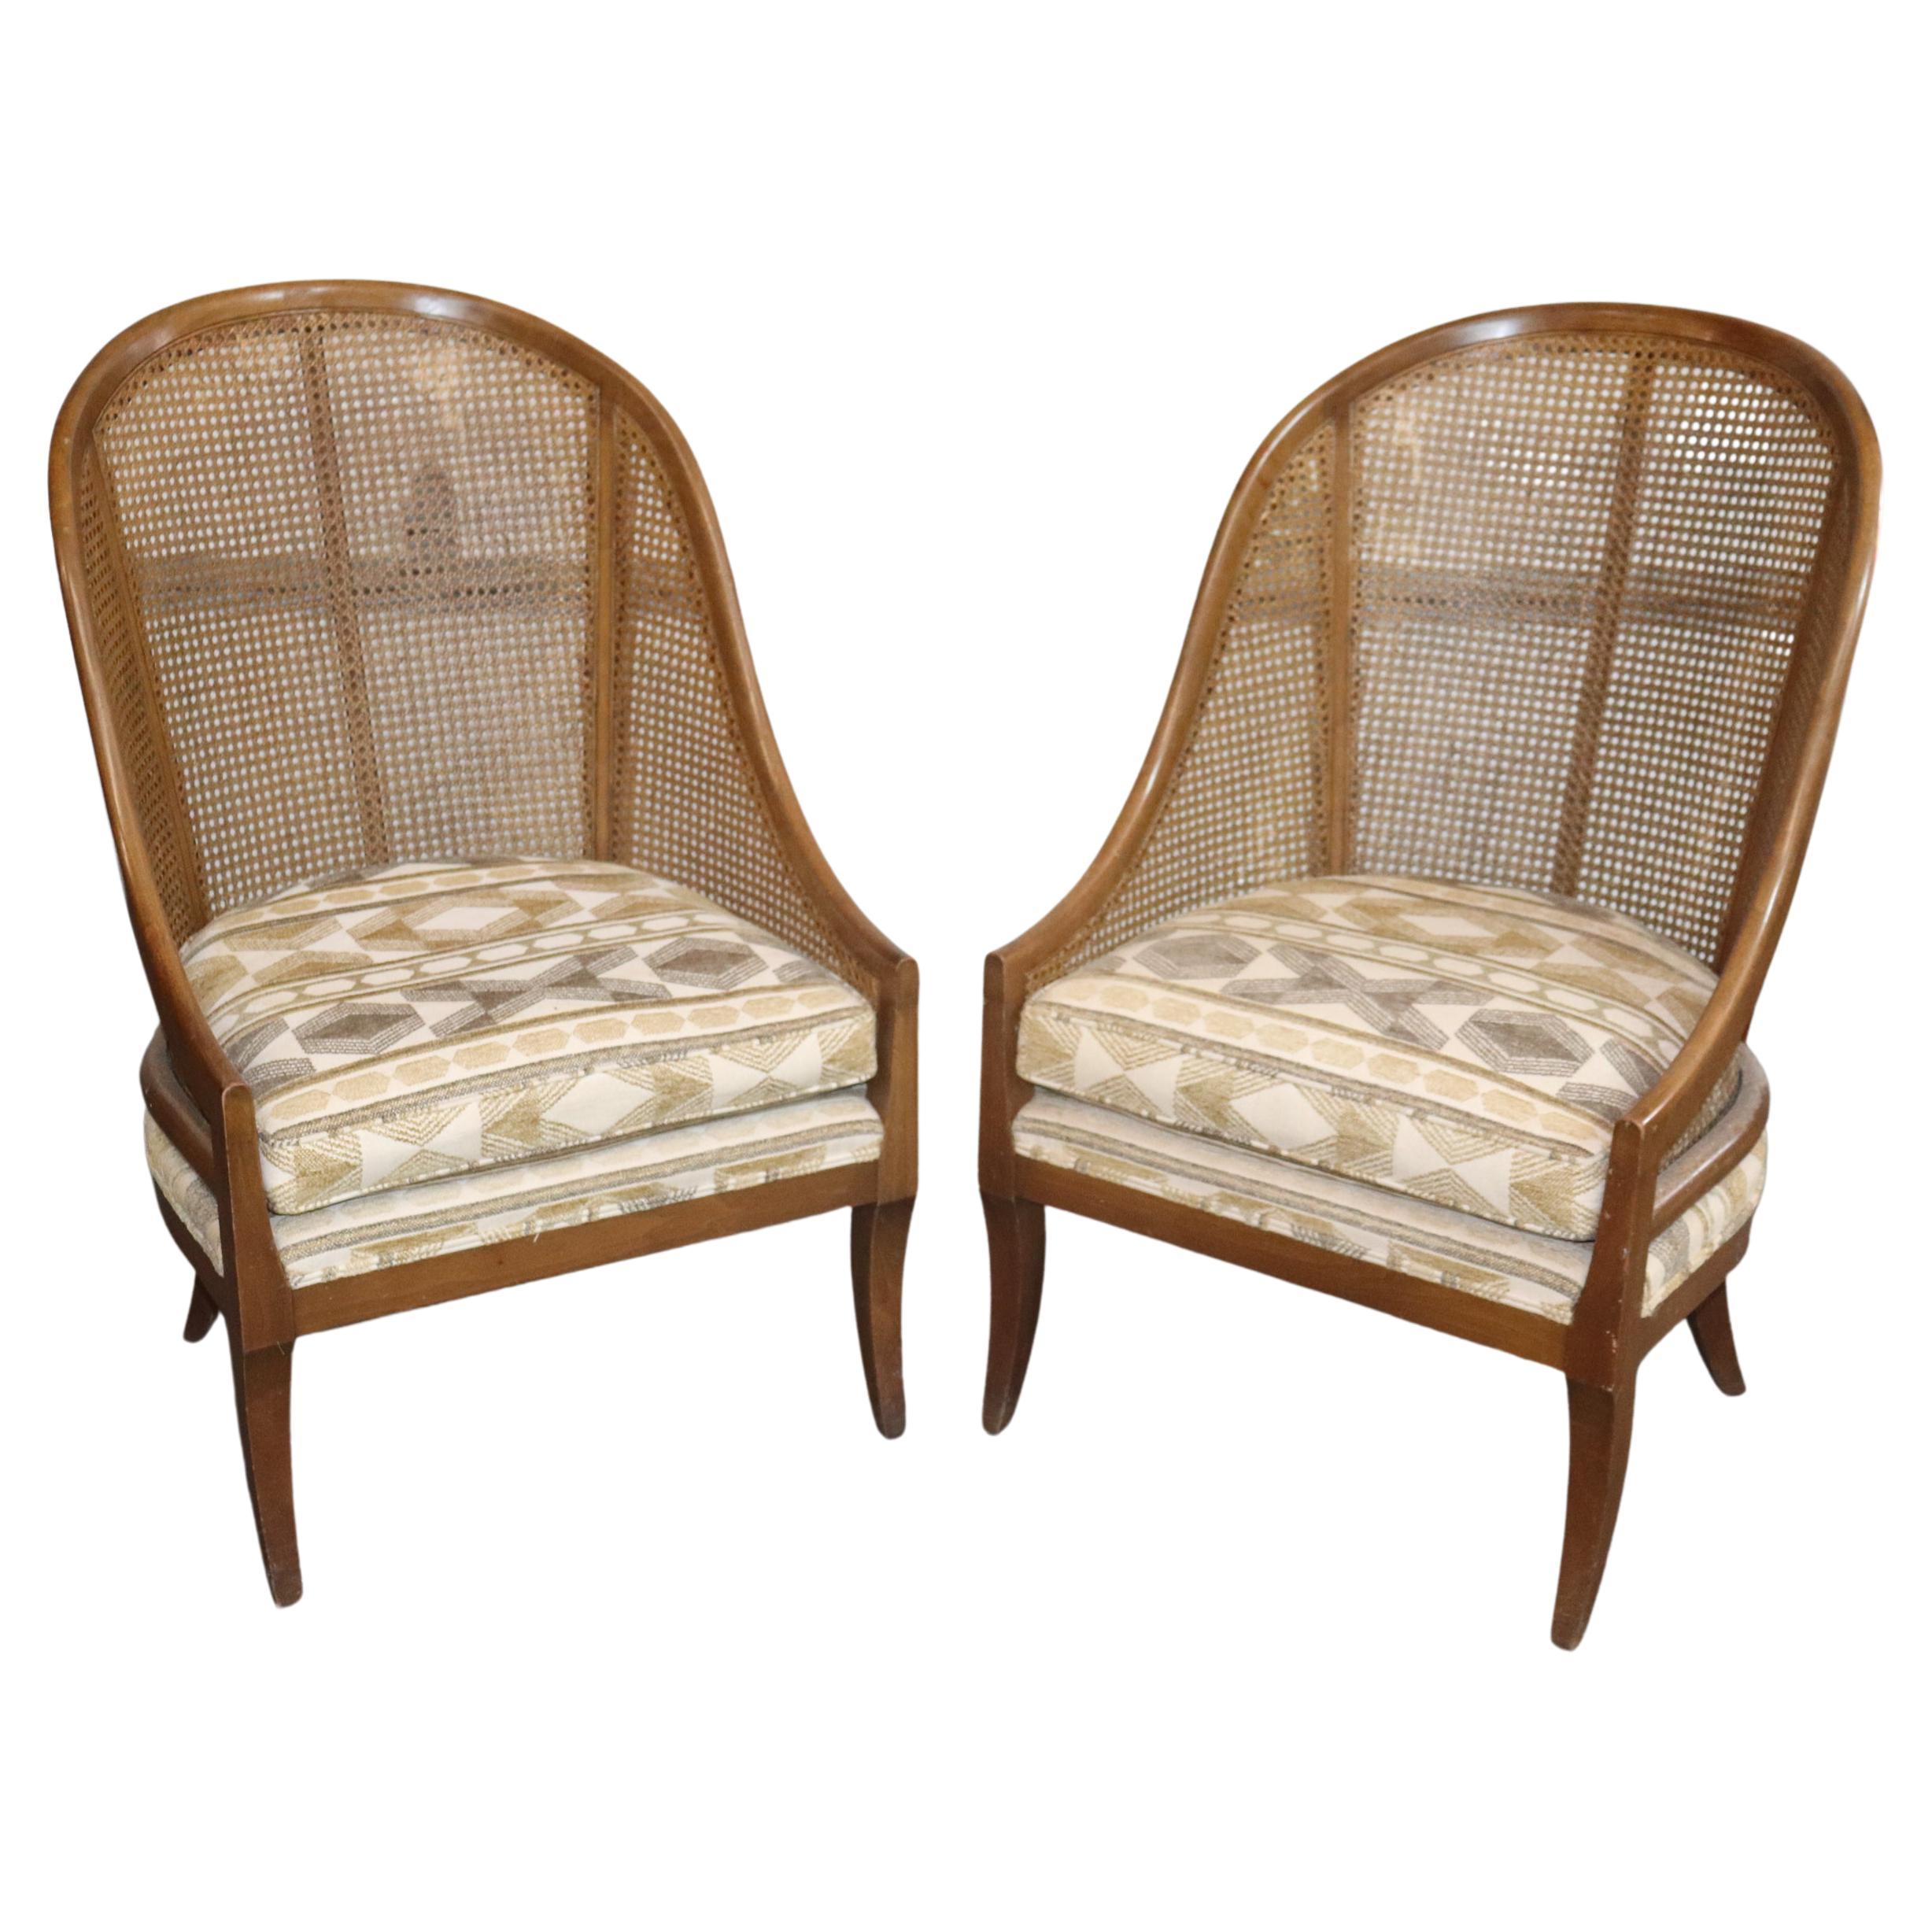 Pair of Large Scale English Regency Cane Back Tub Style Bergere Chairs